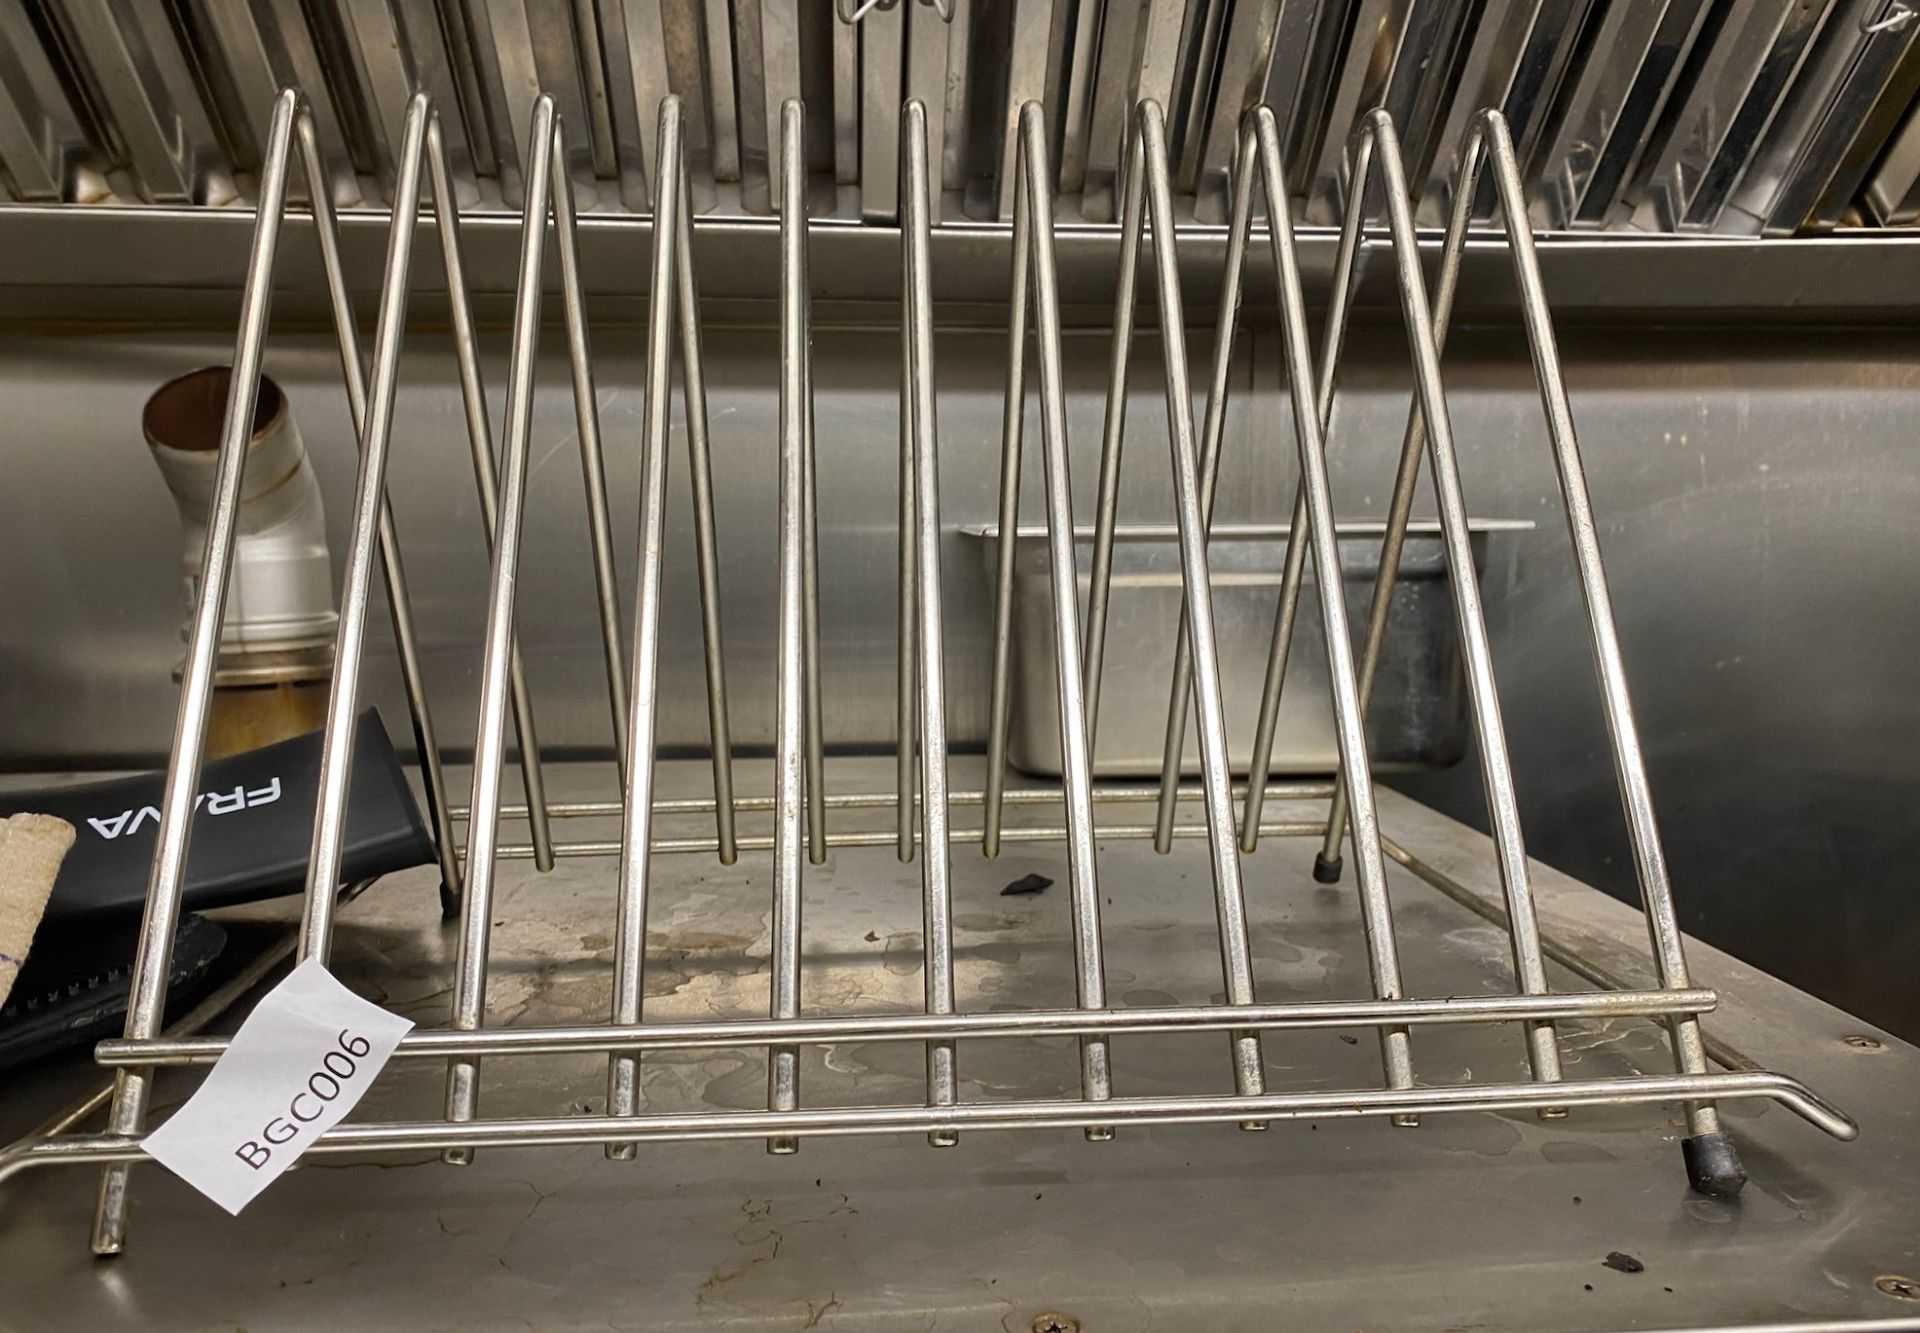 1 x 10 Slot Cooling/Drying/Plate Rack - Ref: BGC006 - CL807 - Covent Garden, LondonFrom a recently